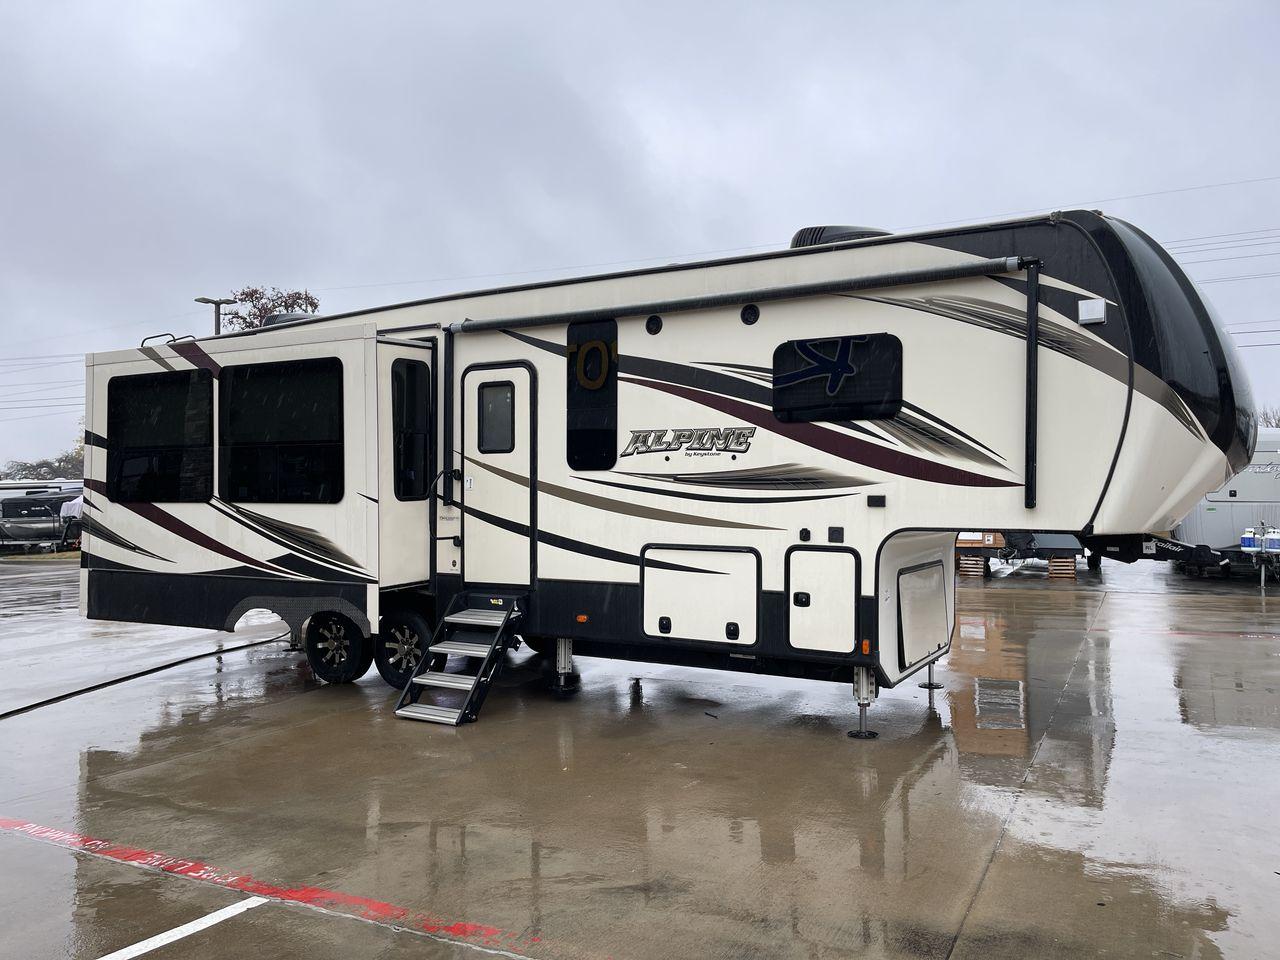 2018 KEYSTONE ALPINE 3011RE (4YDF30127JE) , Length: 34.08 ft. | Dry Weight: 11,945 lbs. | Gross Weight: 15,000 lbs. | Slides: 3 transmission, located at 4319 N Main Street, Cleburne, TX, 76033, (817) 221-0660, 32.435829, -97.384178 - The definition of luxury travel comes with the 2018 Keystone Alpine 3011RE. This is an opulent fifth-wheel trailer designed for discerning adventurers. Spanning 34 feet, this exquisite model boasts three slide-outs, creating a sprawling interior that redefines comfort on the road. The master bedroom - Photo #23